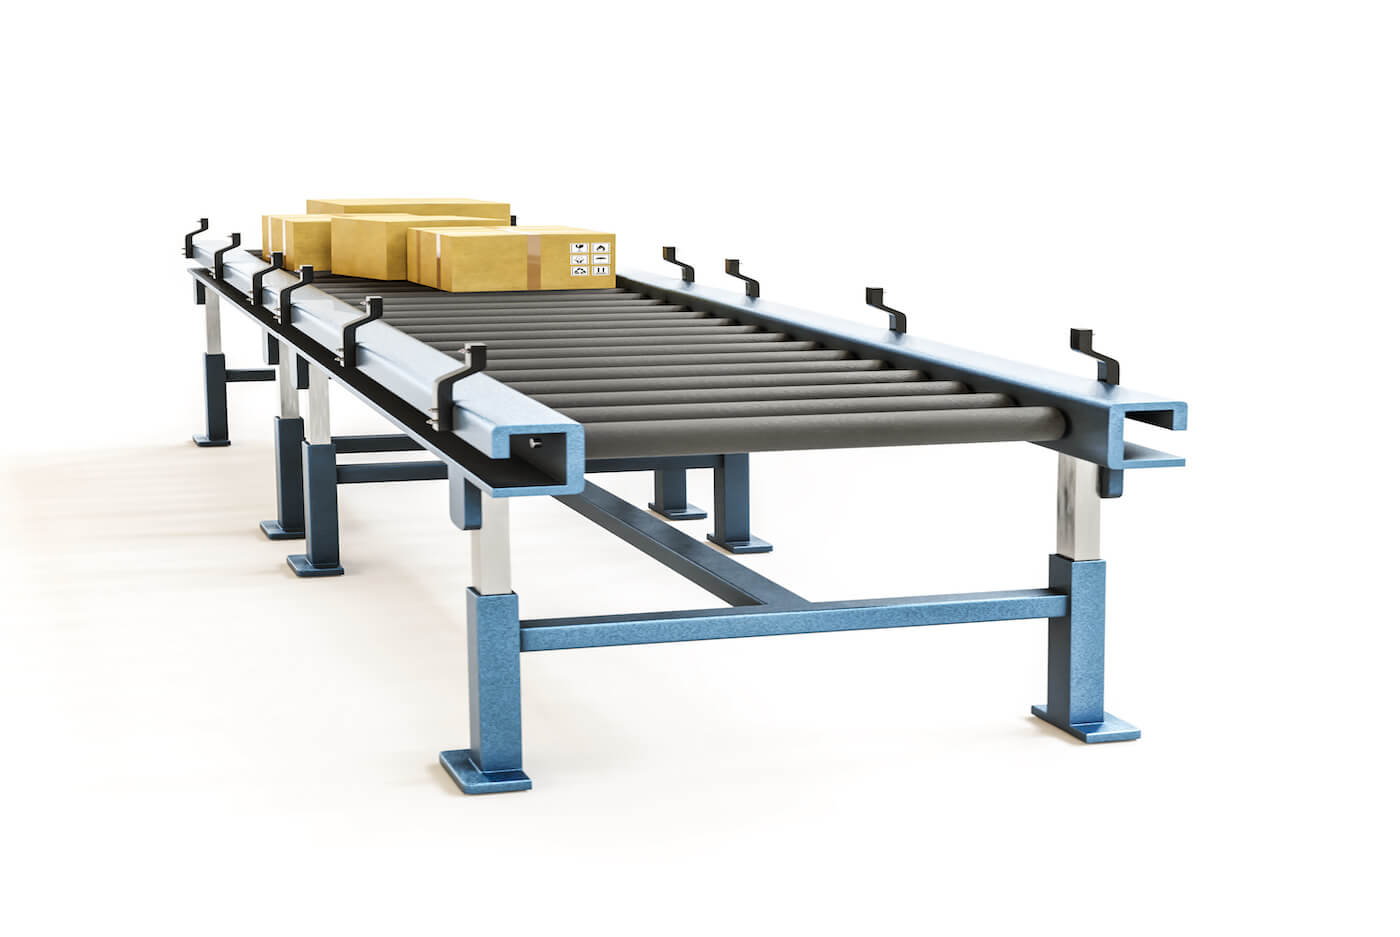 How To Get The Most Out Of Your Gravity Conveyors